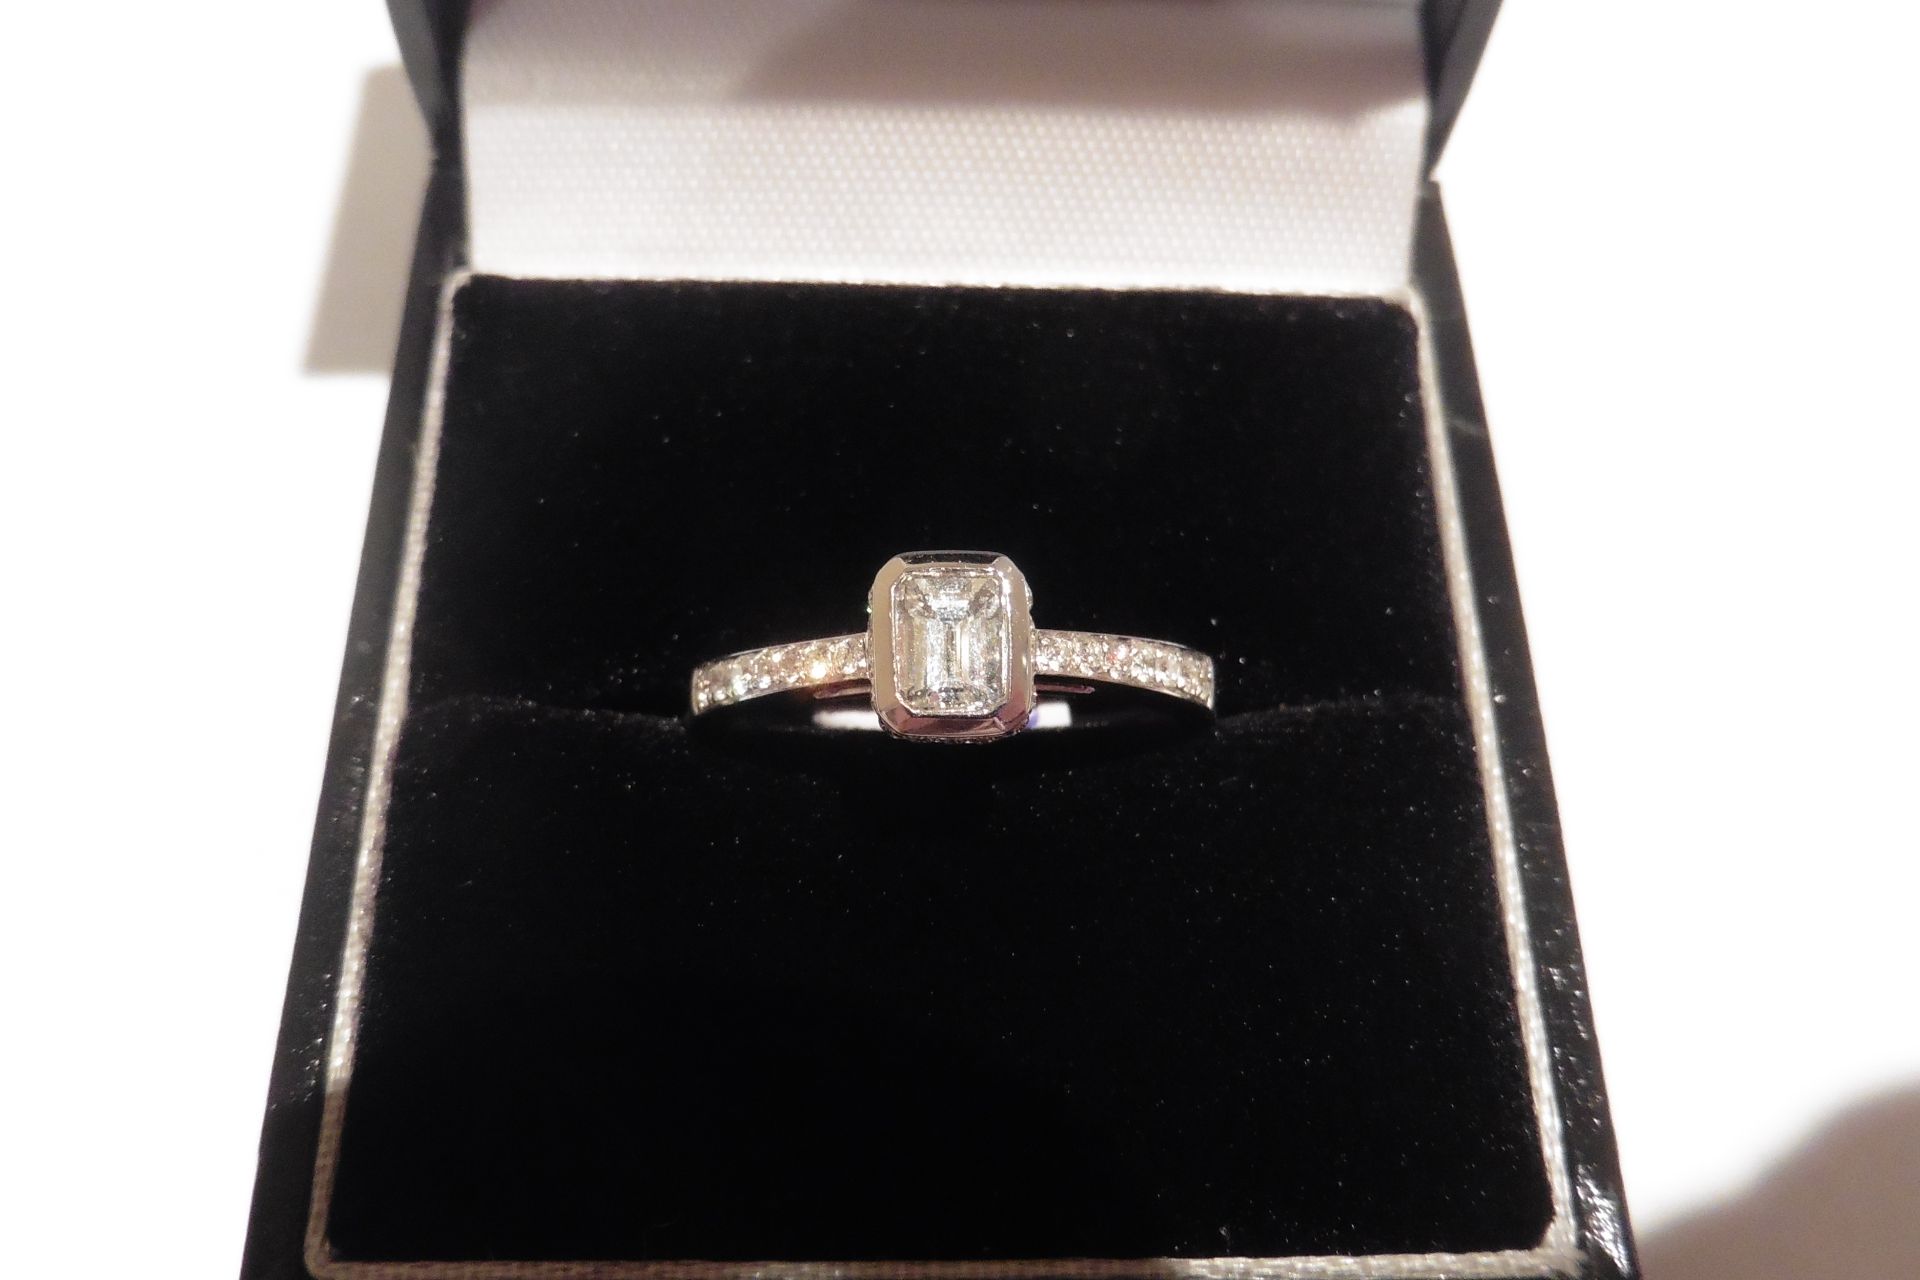 18ct white gold diamond ring with a VS clarity emerald cut diamond, weighing 0.50ct surrounded in a